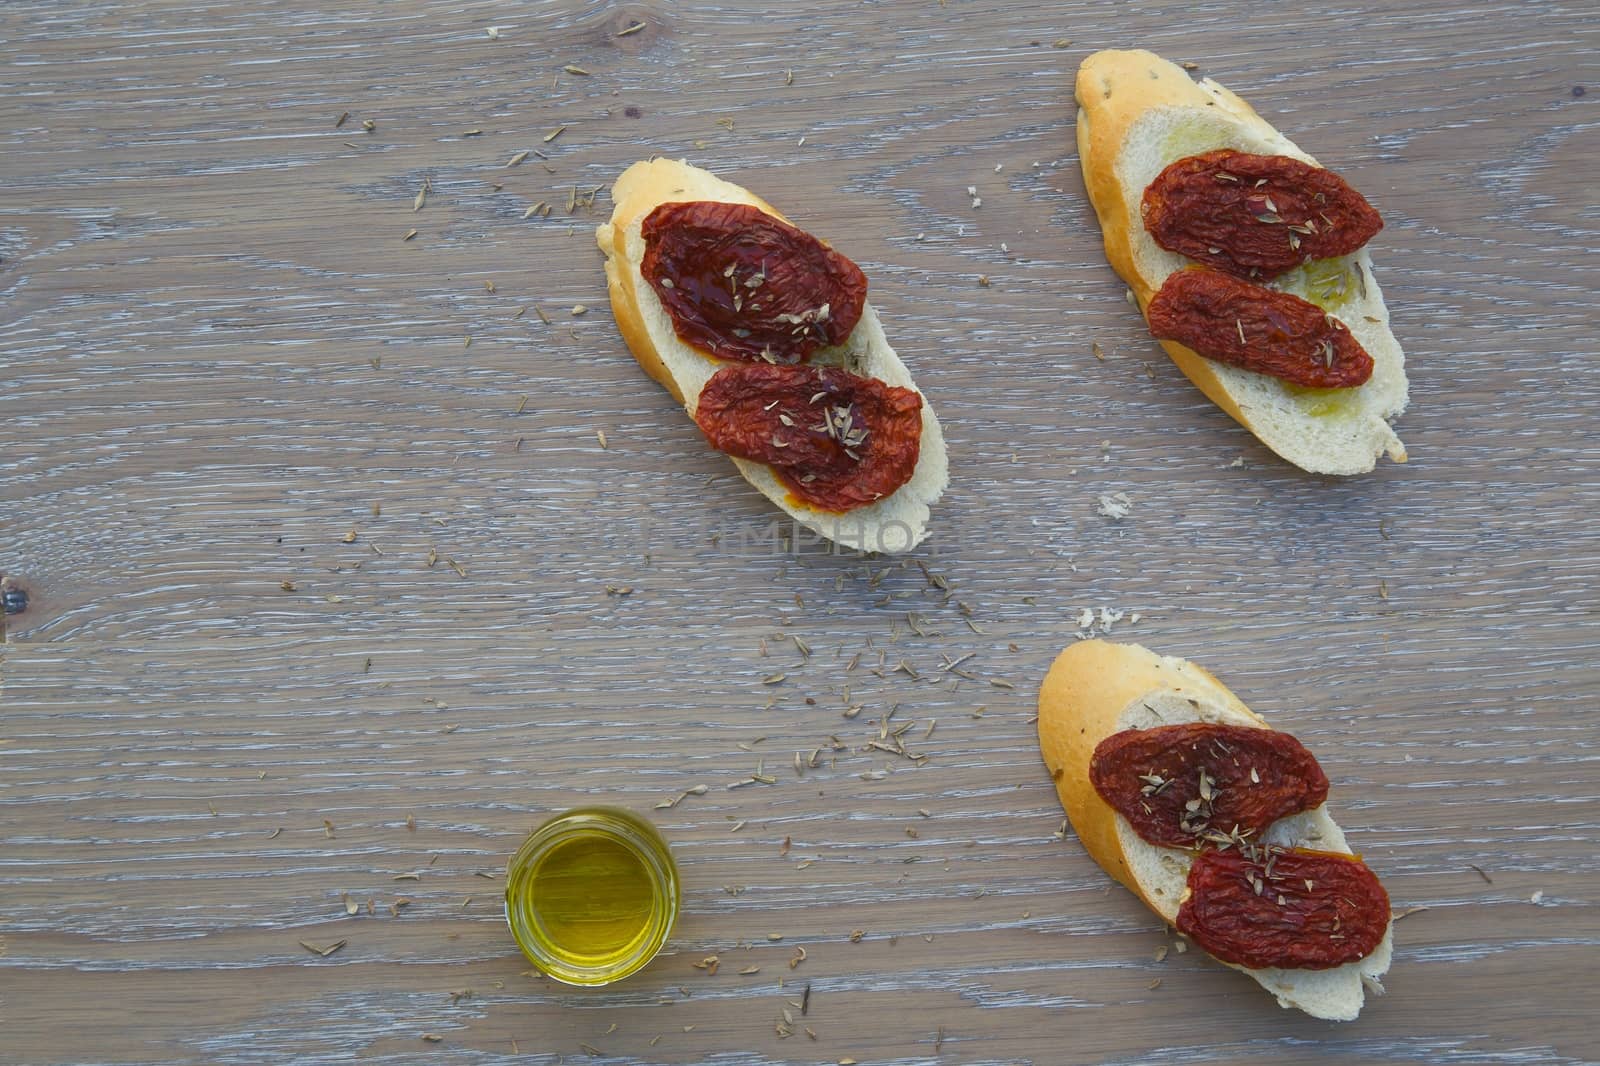 Flavorful starter - sun-dried red tomatoes on the pieces of French baguette by tolikoff_photography